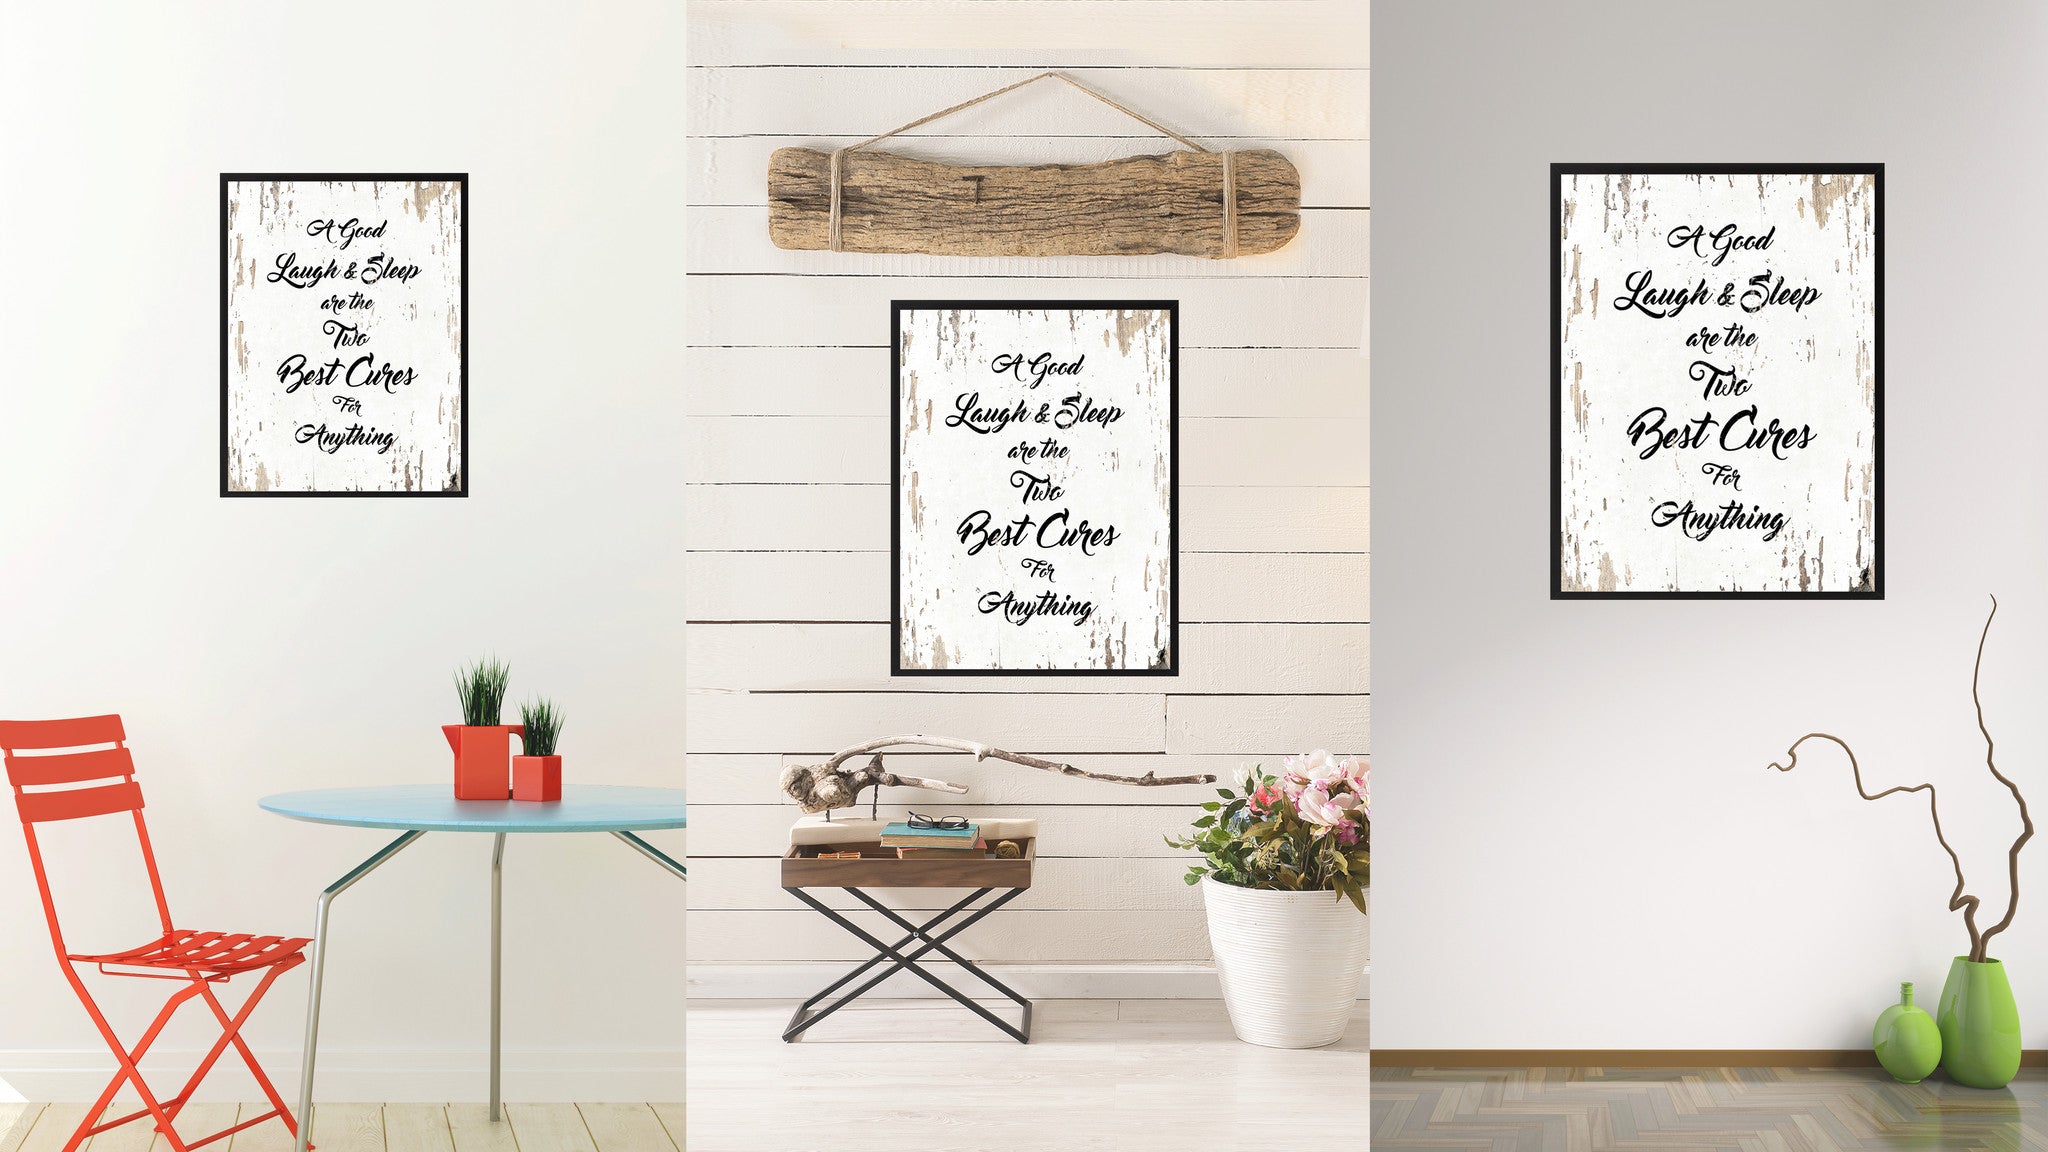 A good laugh & sleep are the two best cures for anything Quote Saying Gift Ideas Home Decor Wall Art